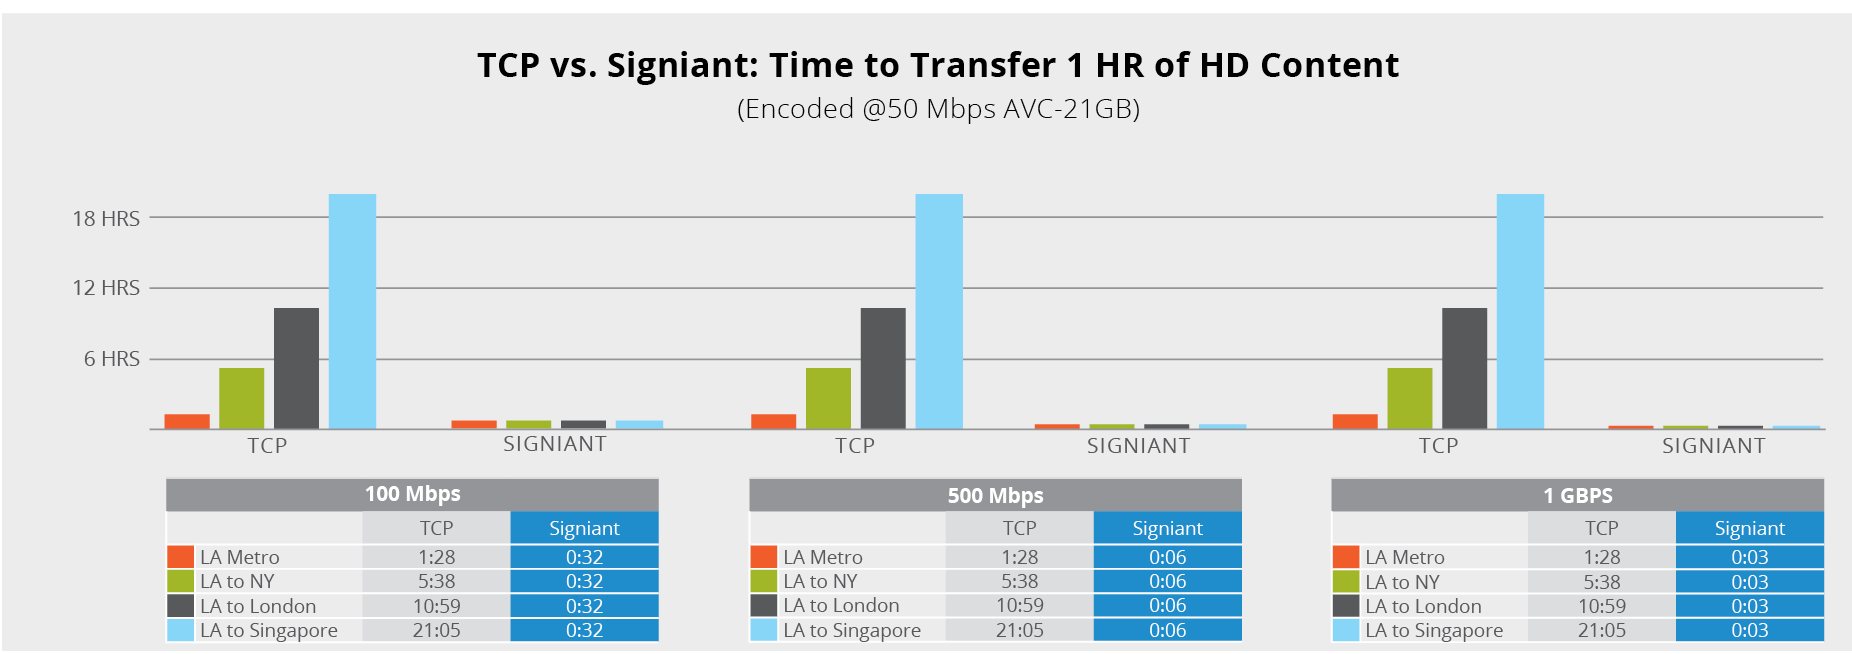 Graph comparing the time it takes to transfer 1 HR of HD content with TCP vs. Signiant, highlights Signiant's speed